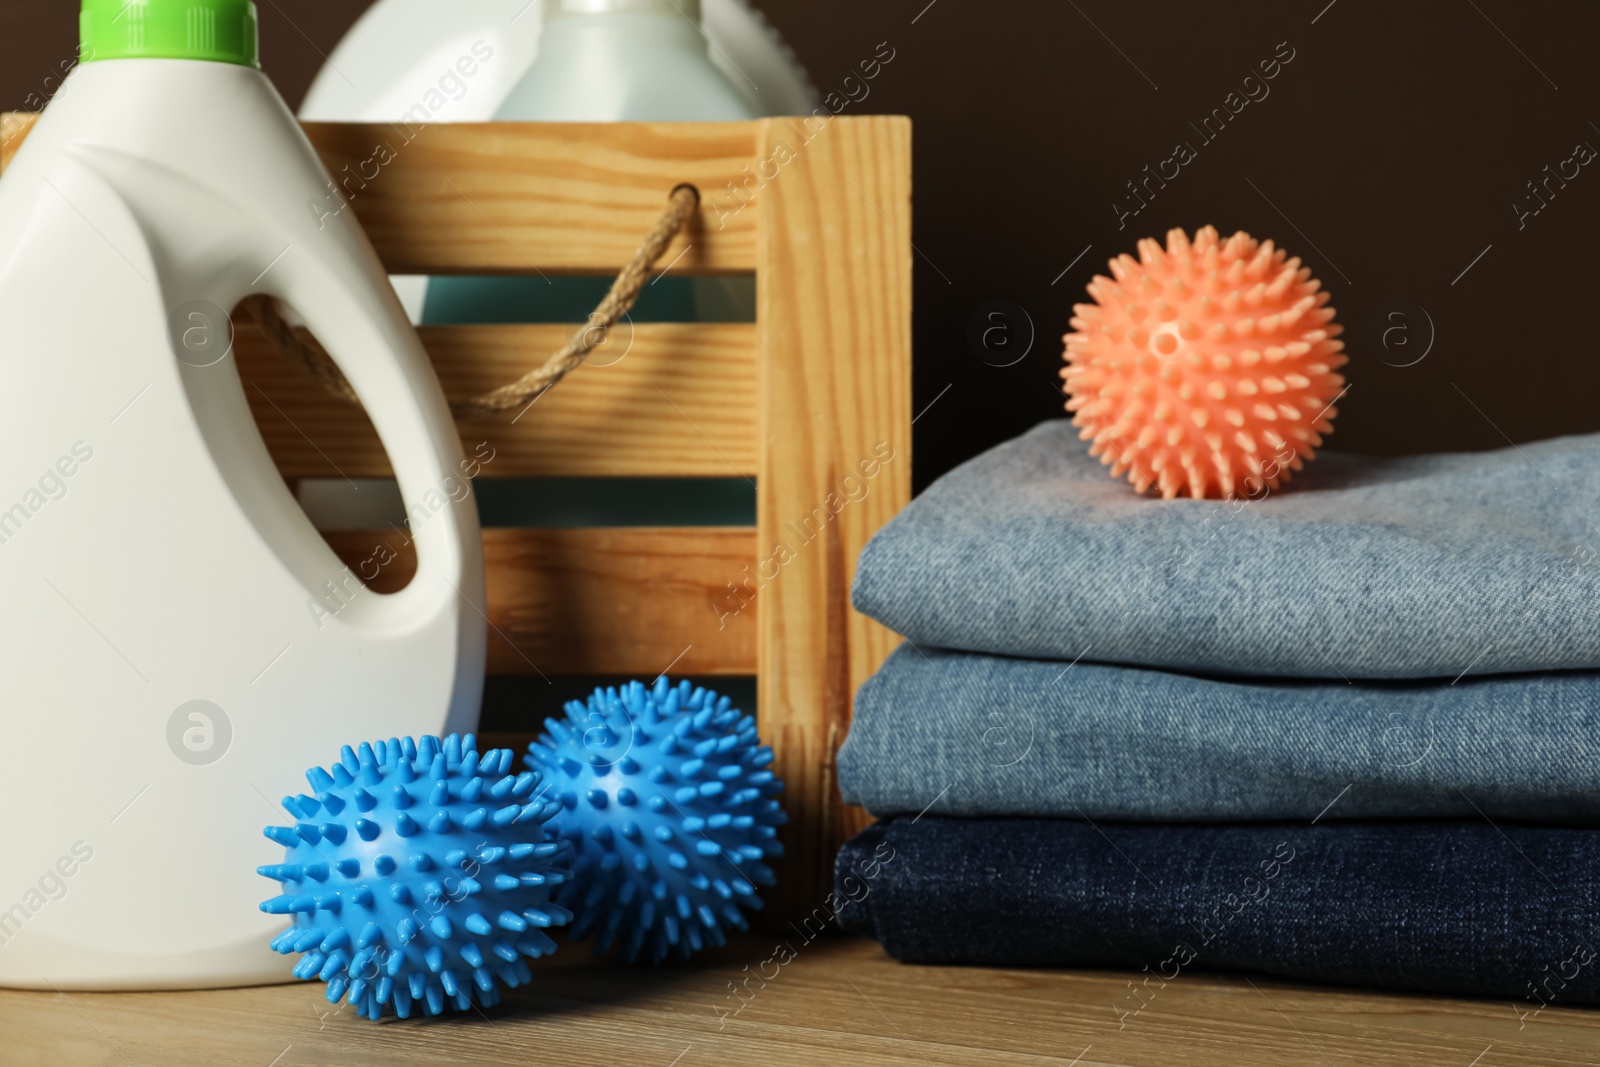 Photo of Many dryer balls, stacked clean clothes and laundry detergents on wooden table